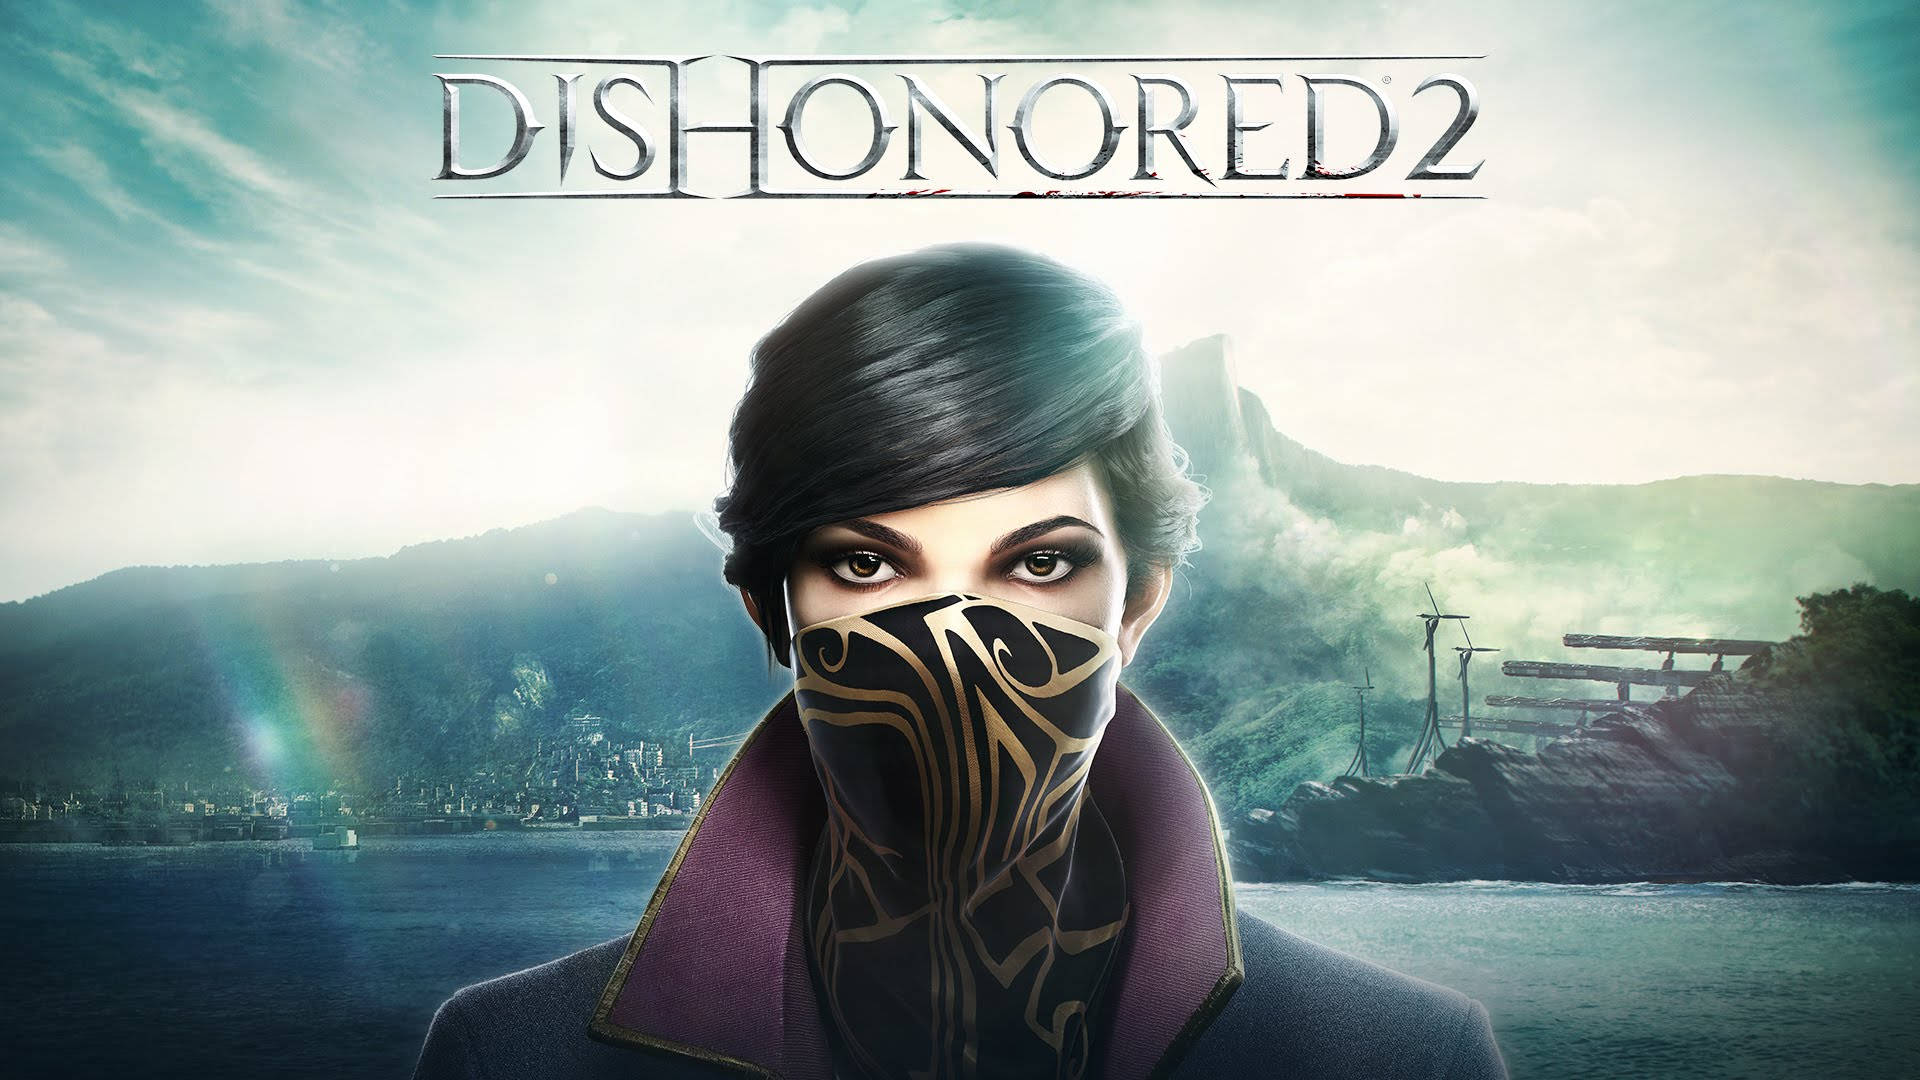 Dishonored 2 Emily Kaldwin Game Title Wallpaper